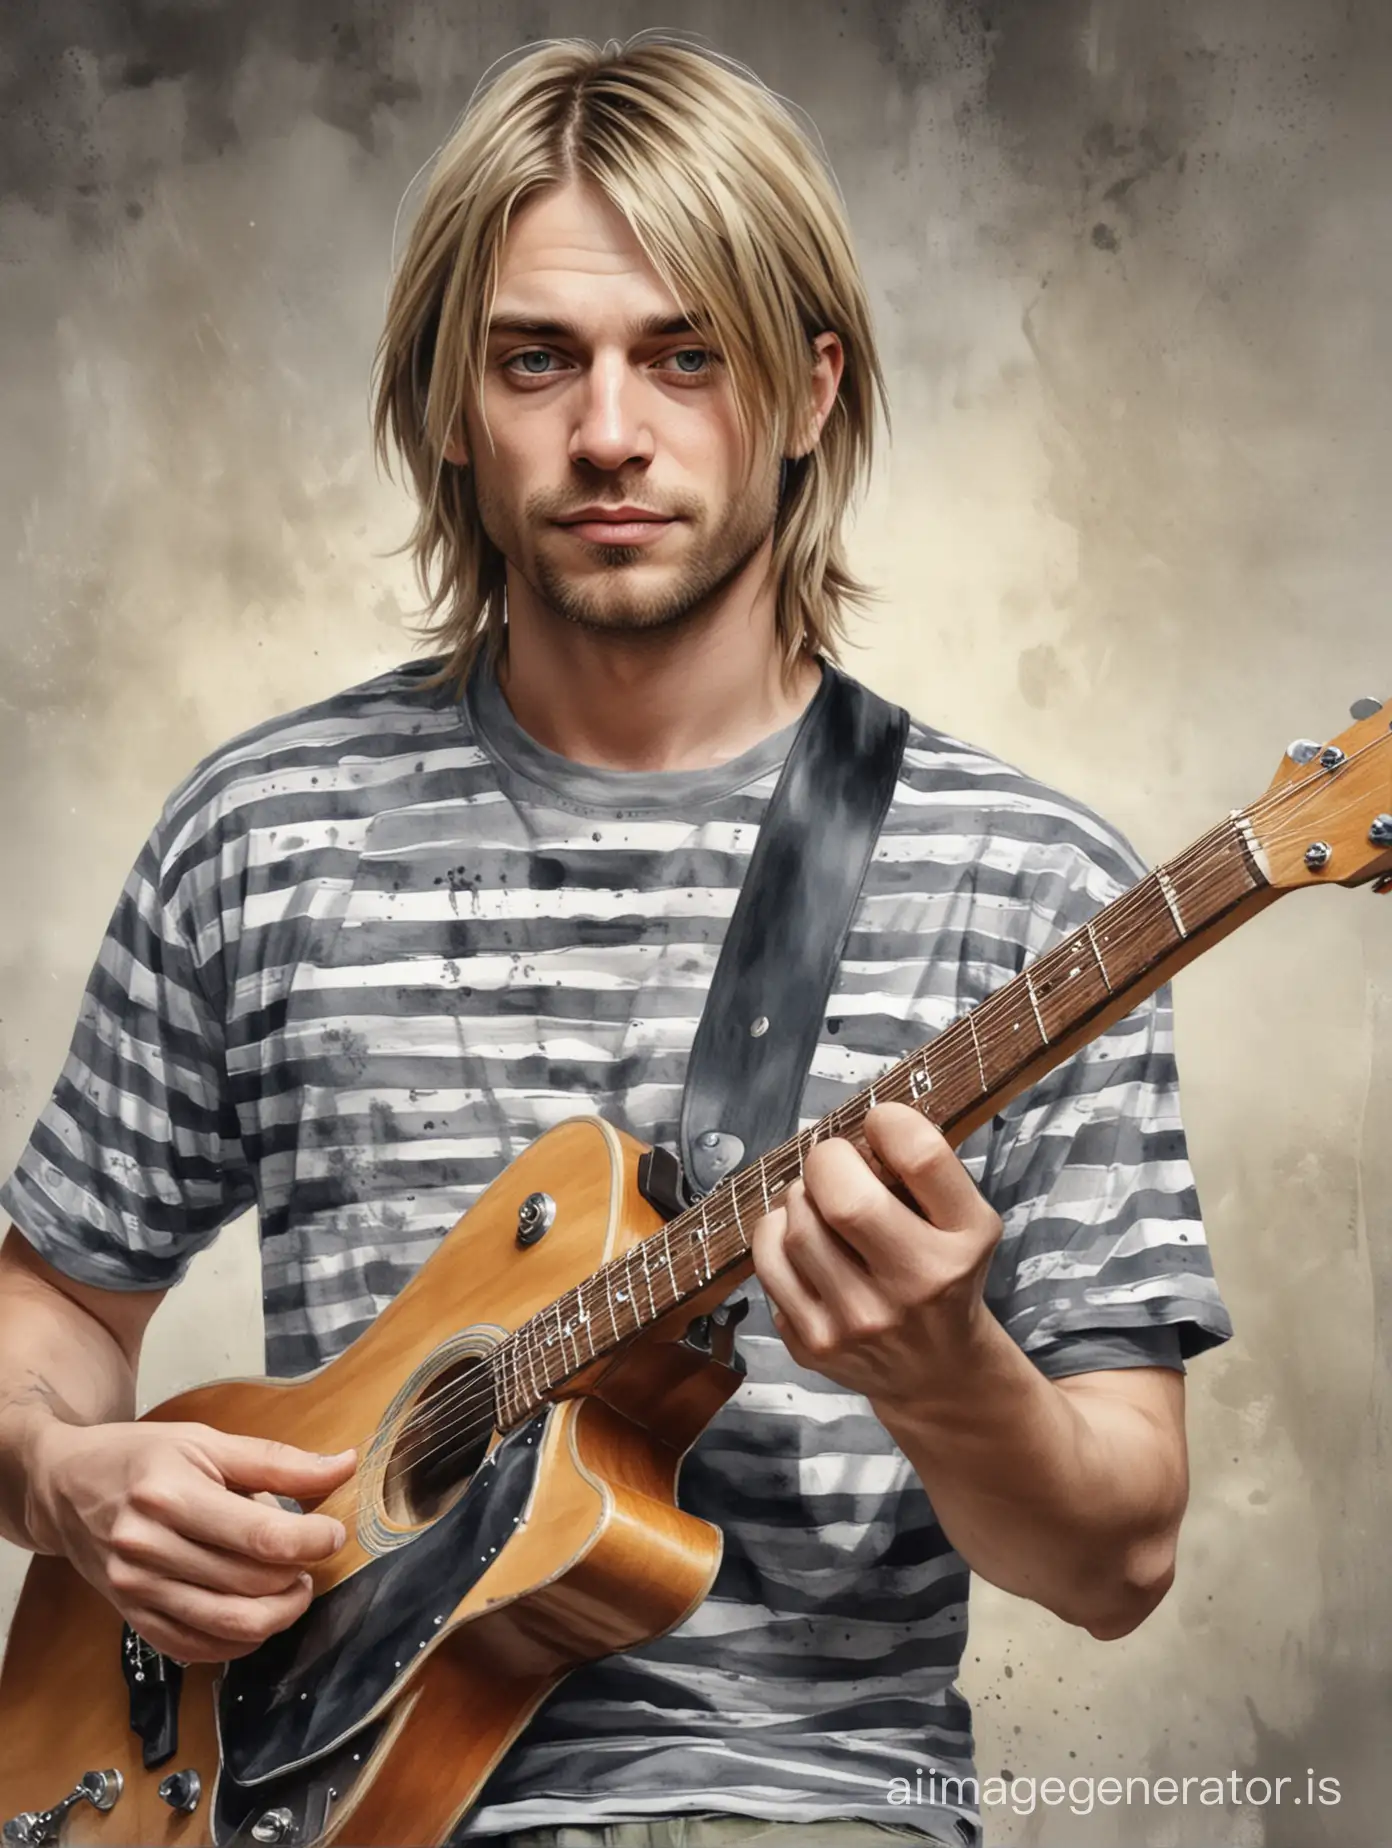 Realistic image, watercolor painting, produces an American man, named Cobain, wearing a striped gray t-shirt, playing the guitar seen from the front, detailed image, detailed visuals, looks real, HD